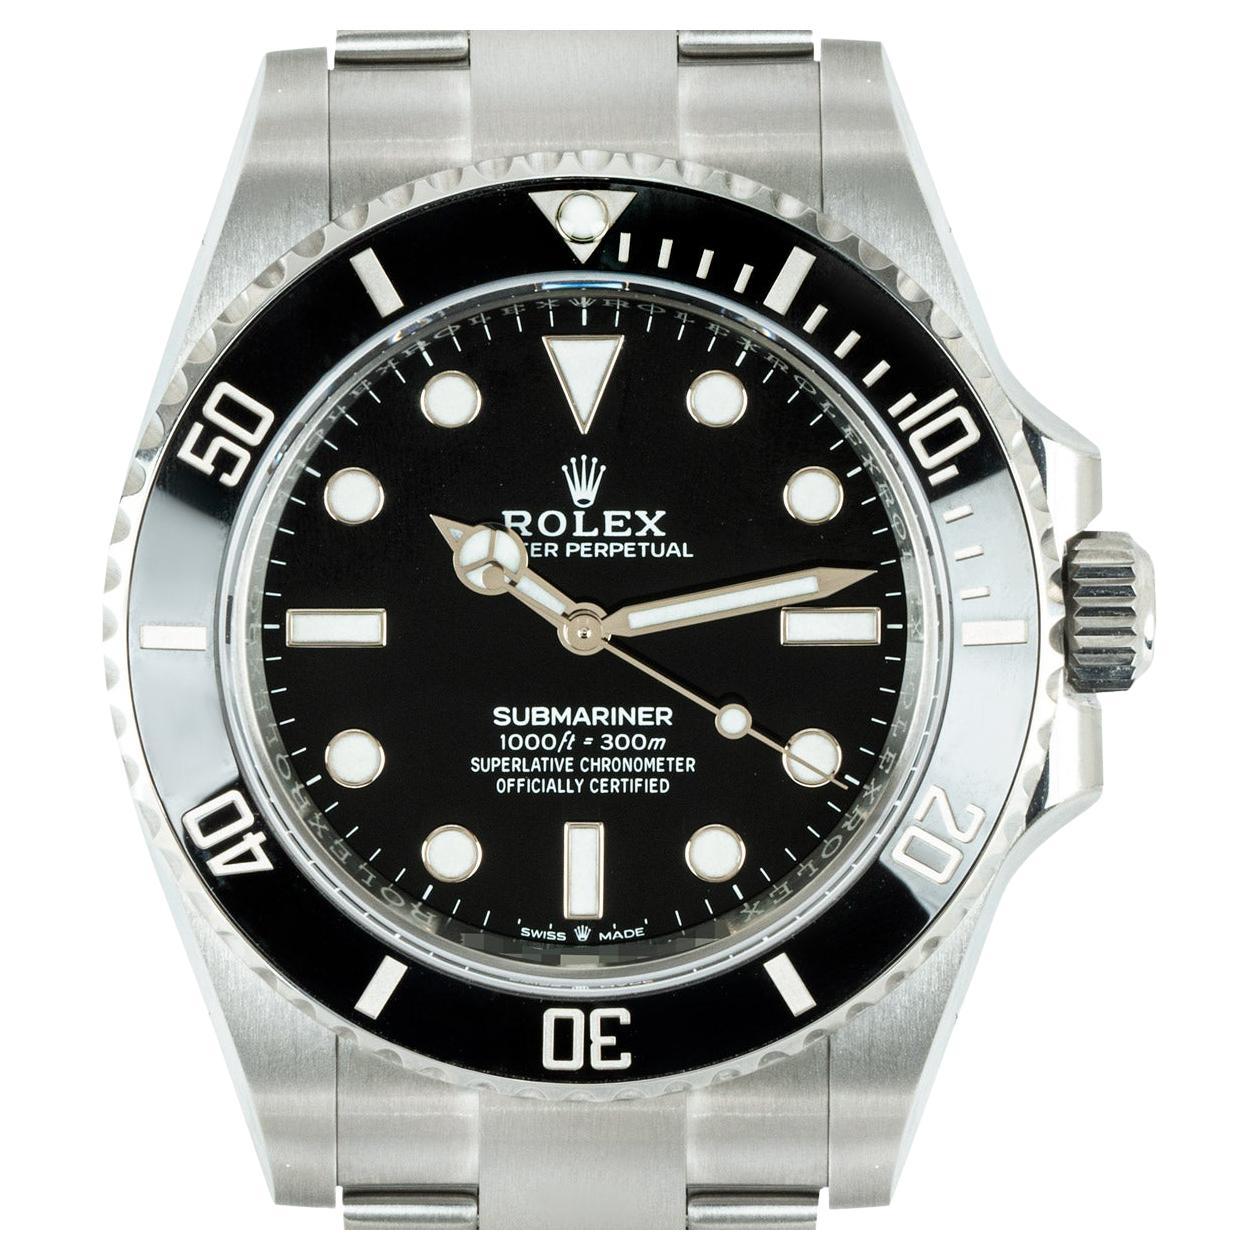 An unworn 41mm Submariner Non-Date in Oystersteel by Rolex. Featuring a black dial and a black ceramic unidirectional rotatable bezel with 60-minute graduations coated in platinum.

The Oyster bracelet comes with a folding Oysterlock clasp which is